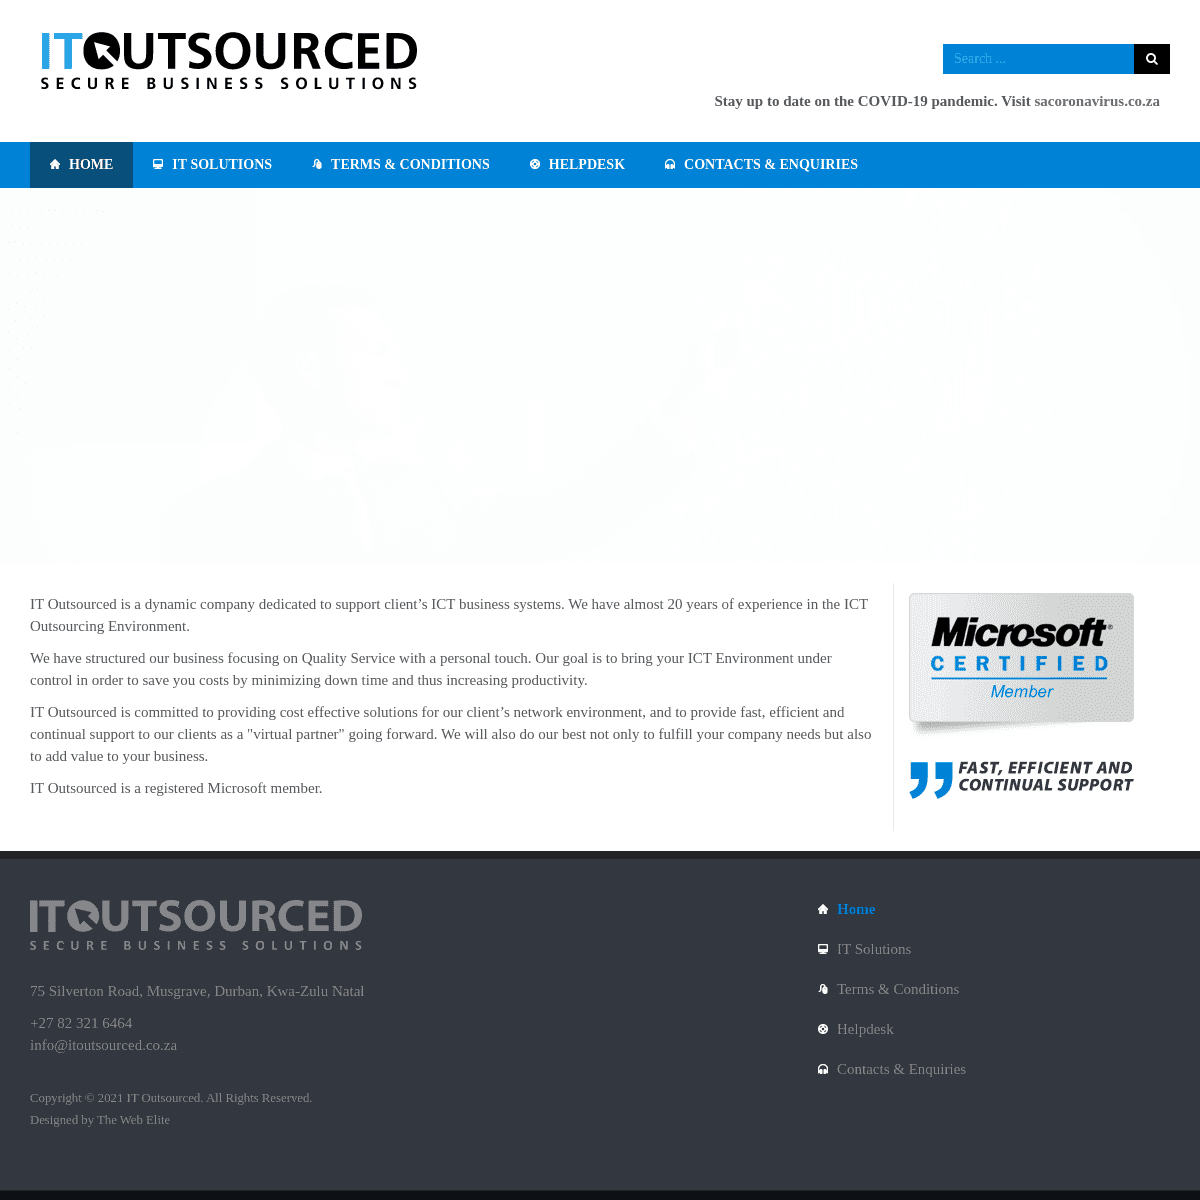 A complete backup of https://itoutsourced.co.za